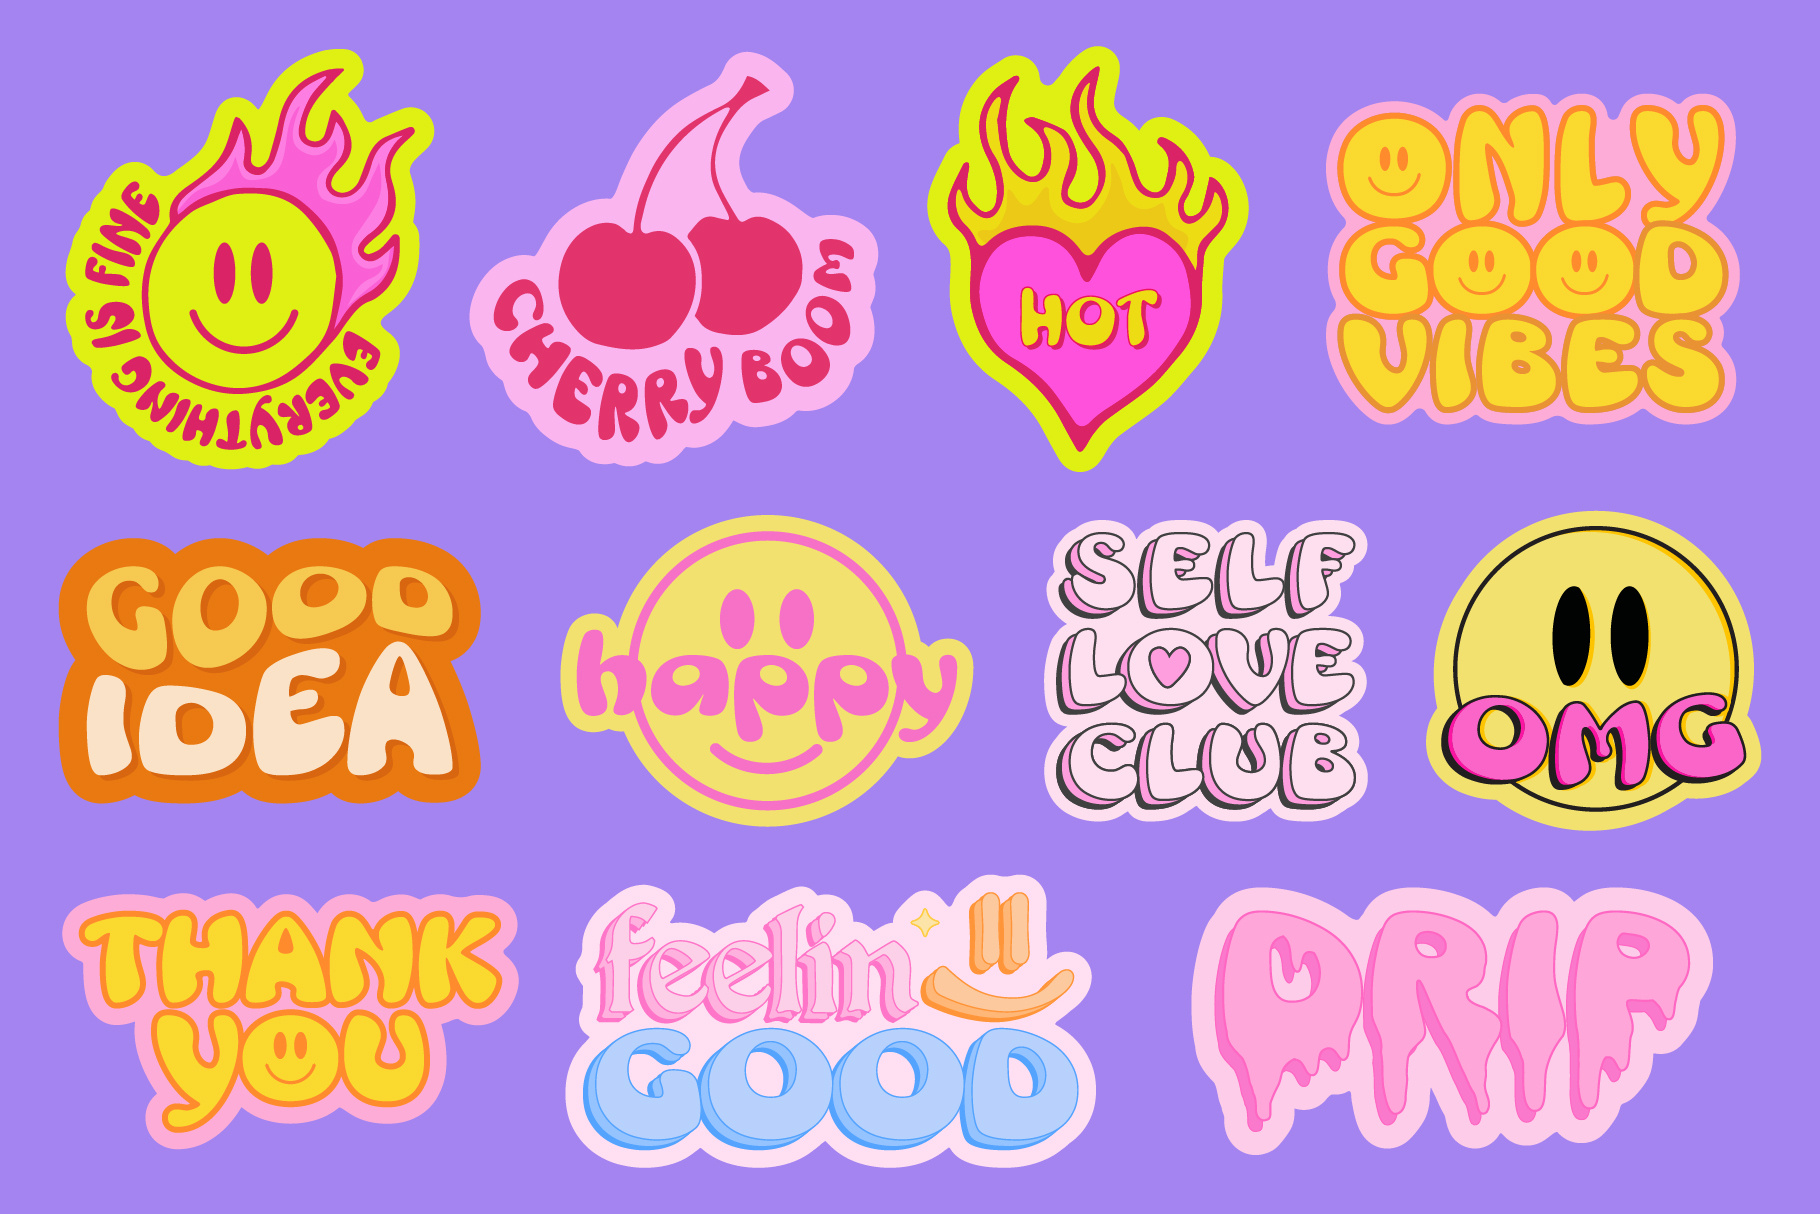 POSITIVE STICKERS PACK VOL.2 by Craftlove on Dribbble